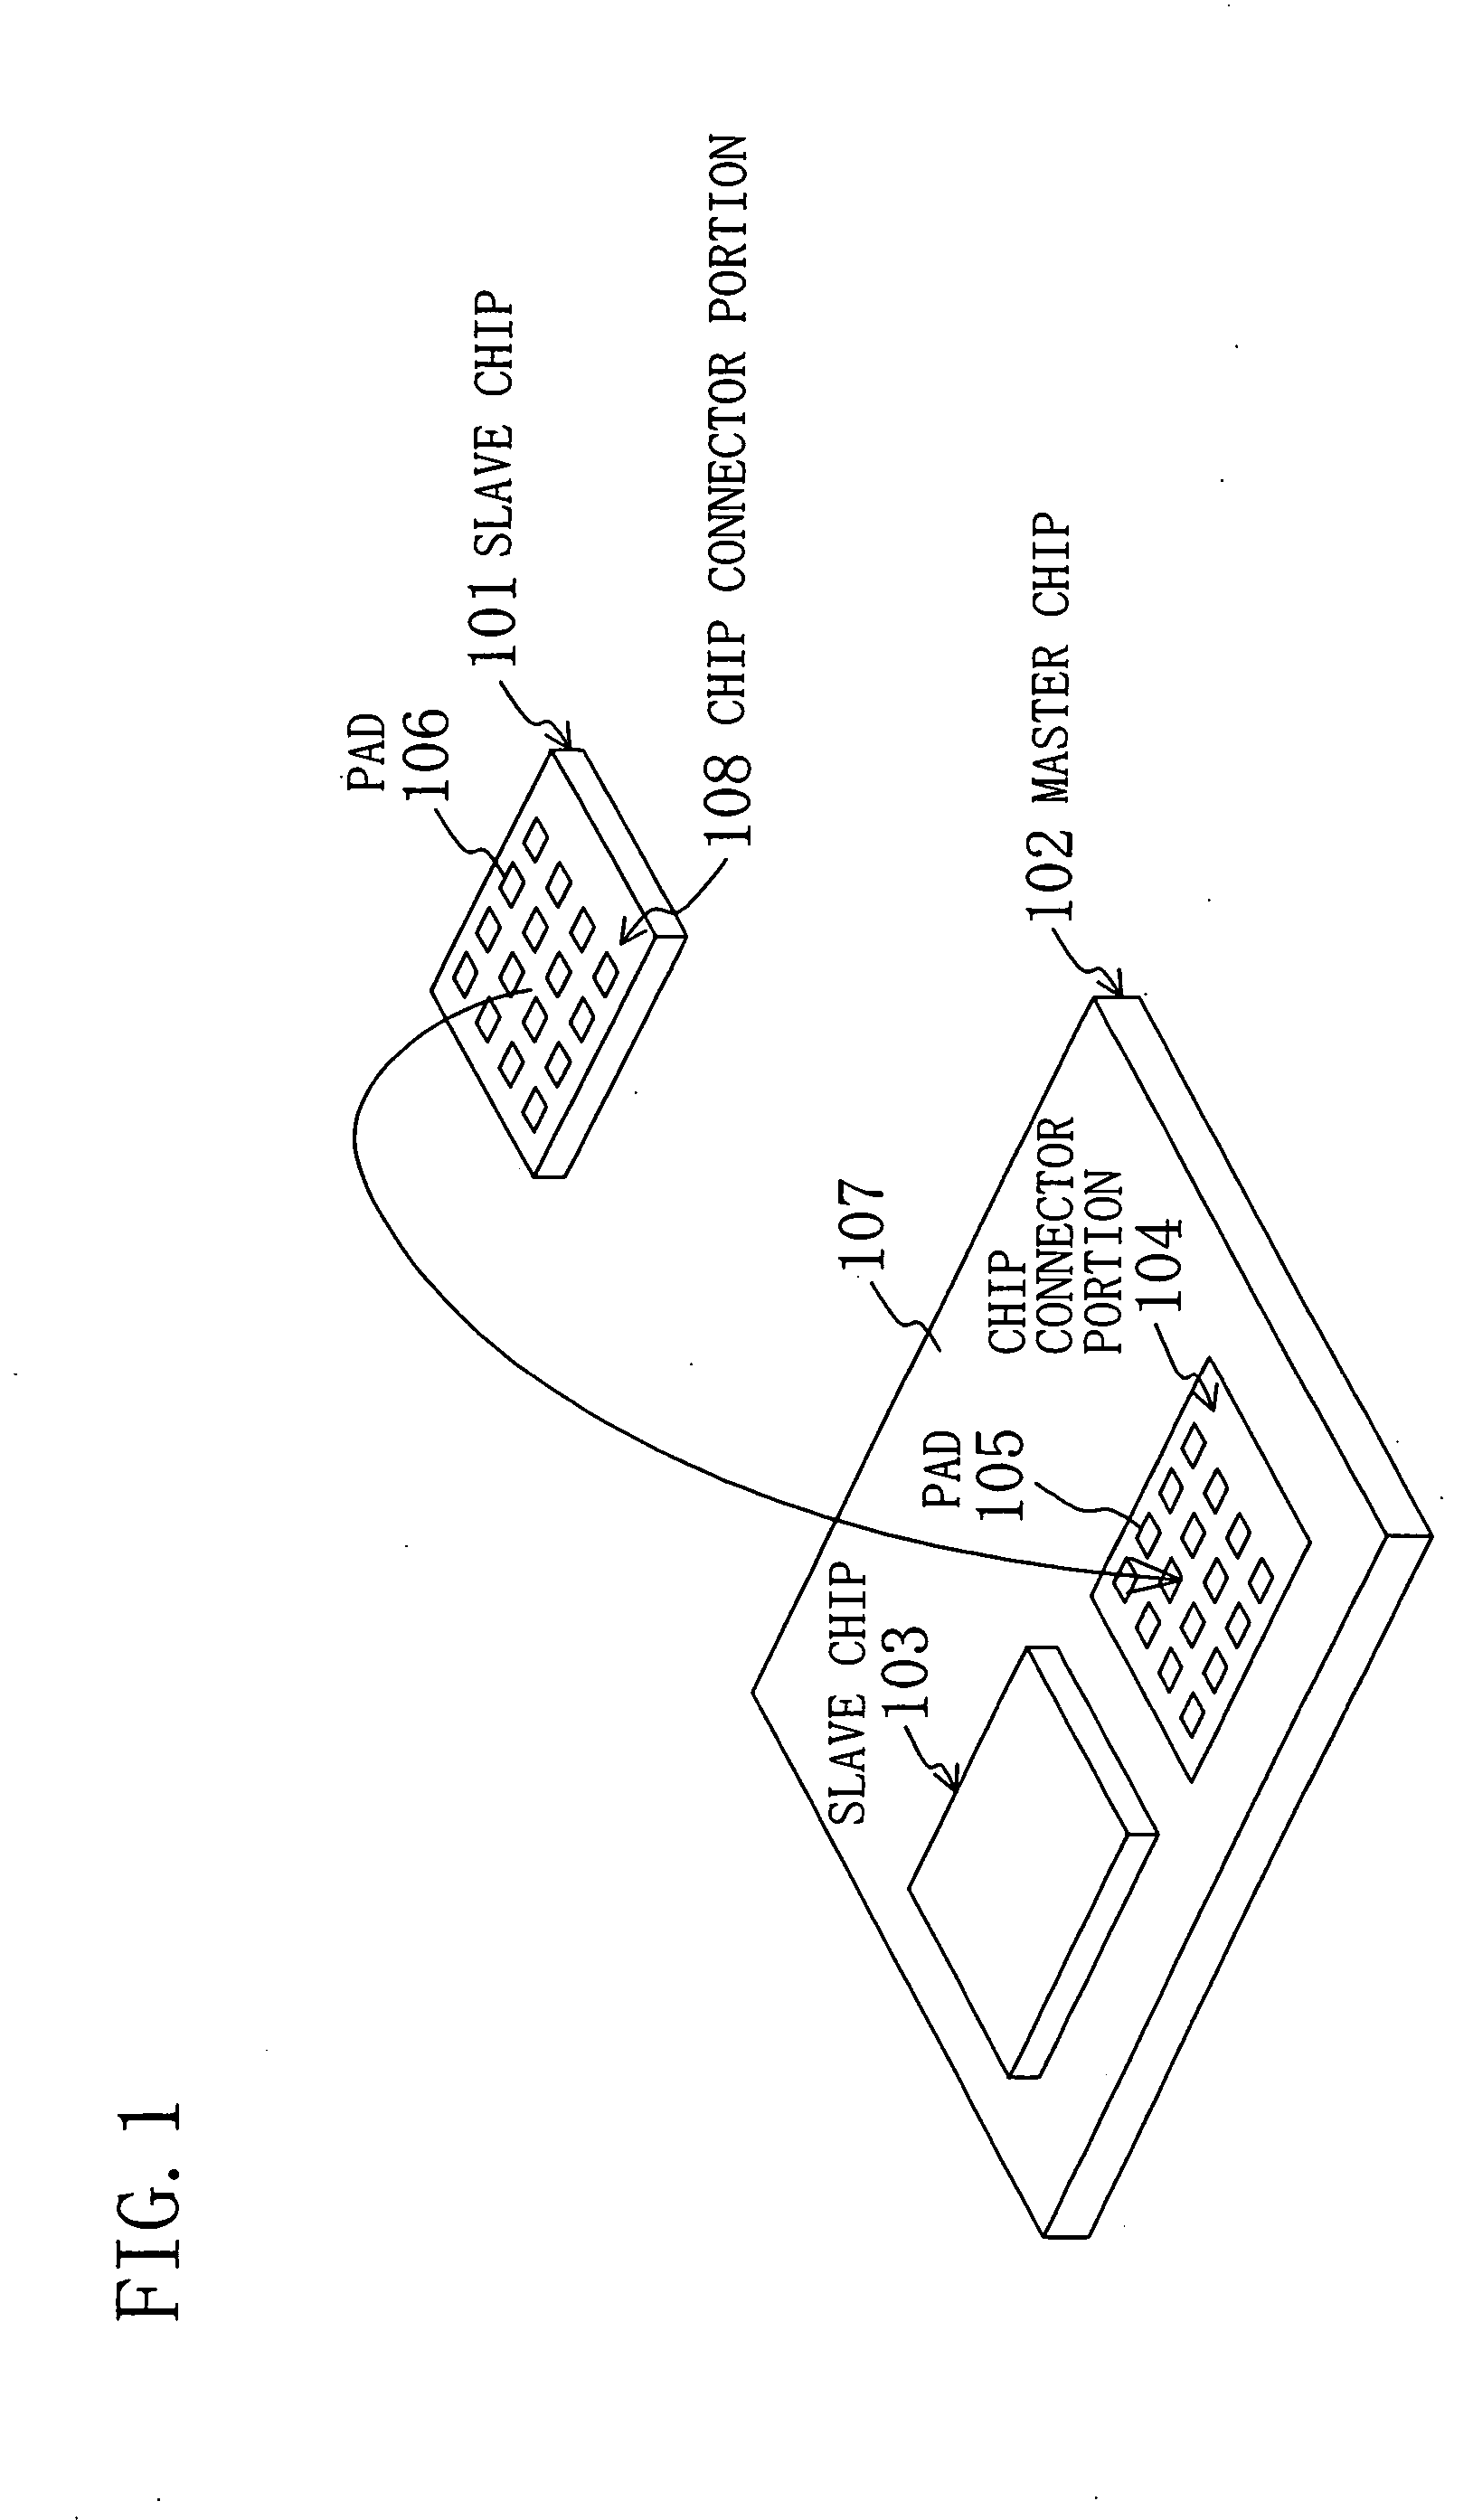 Semiconductor memory device and multi-chip module comprising the semiconductor memory device